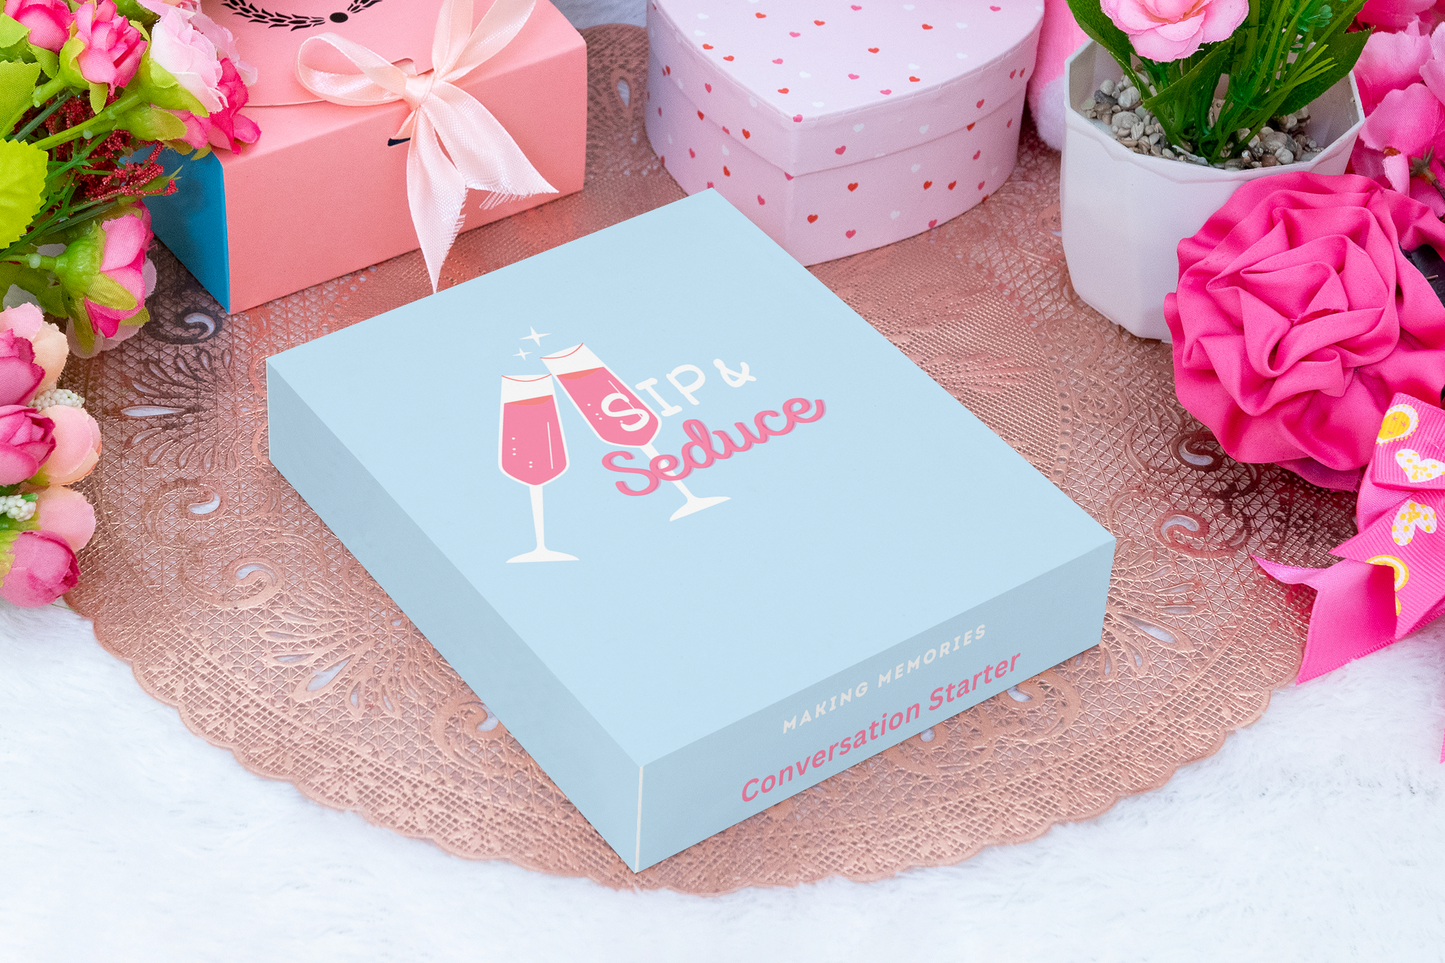 SIP AND SEDUCE CONNECTION CARD GAME